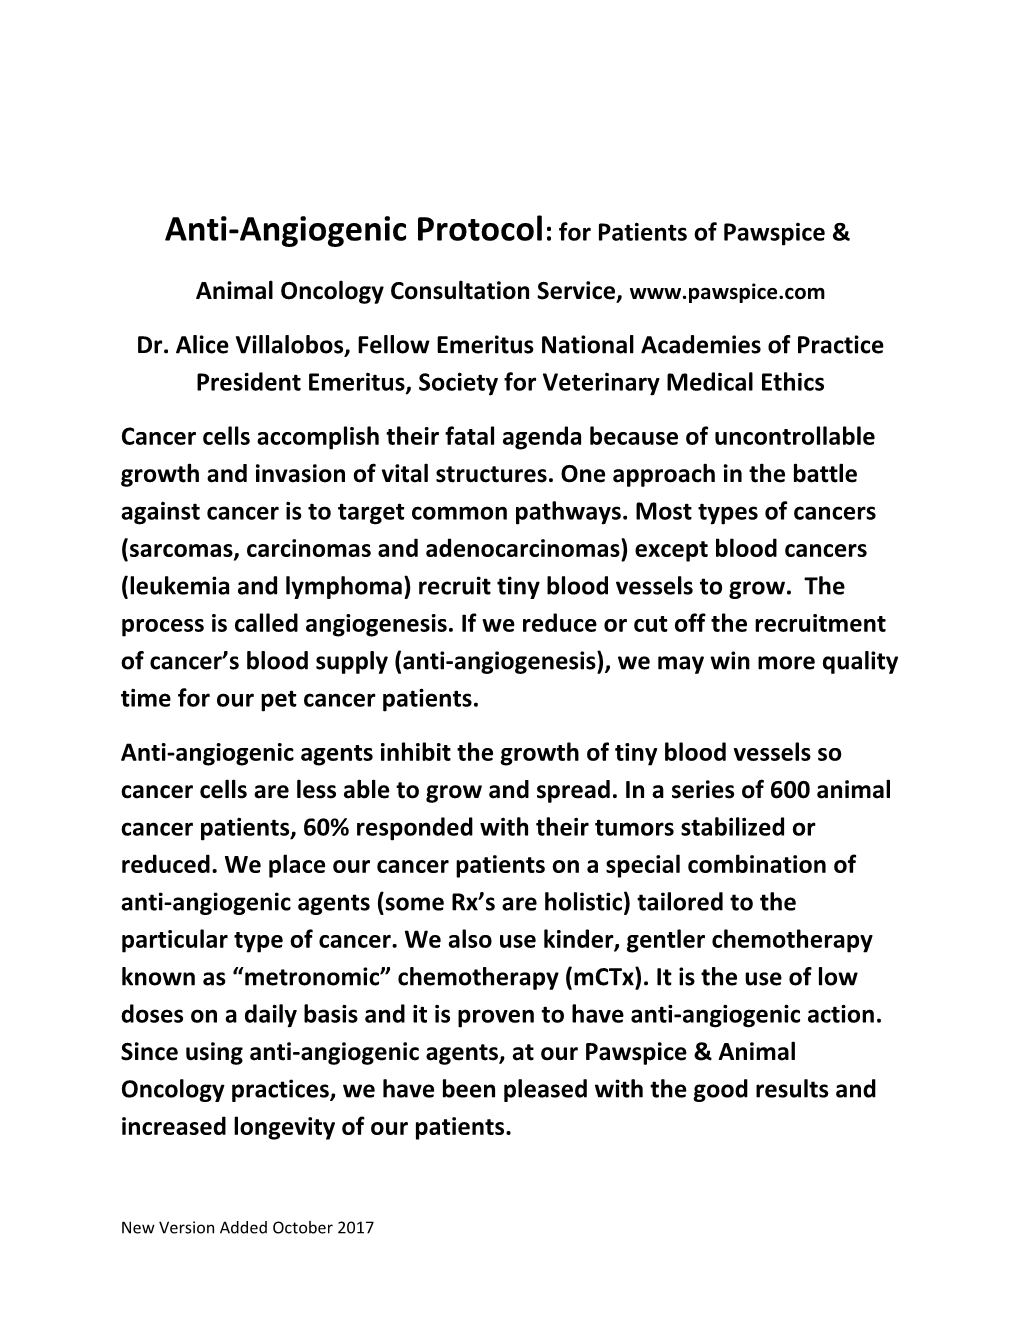 Anti-Angiogenic Protocol: for Patients of Pawspice &